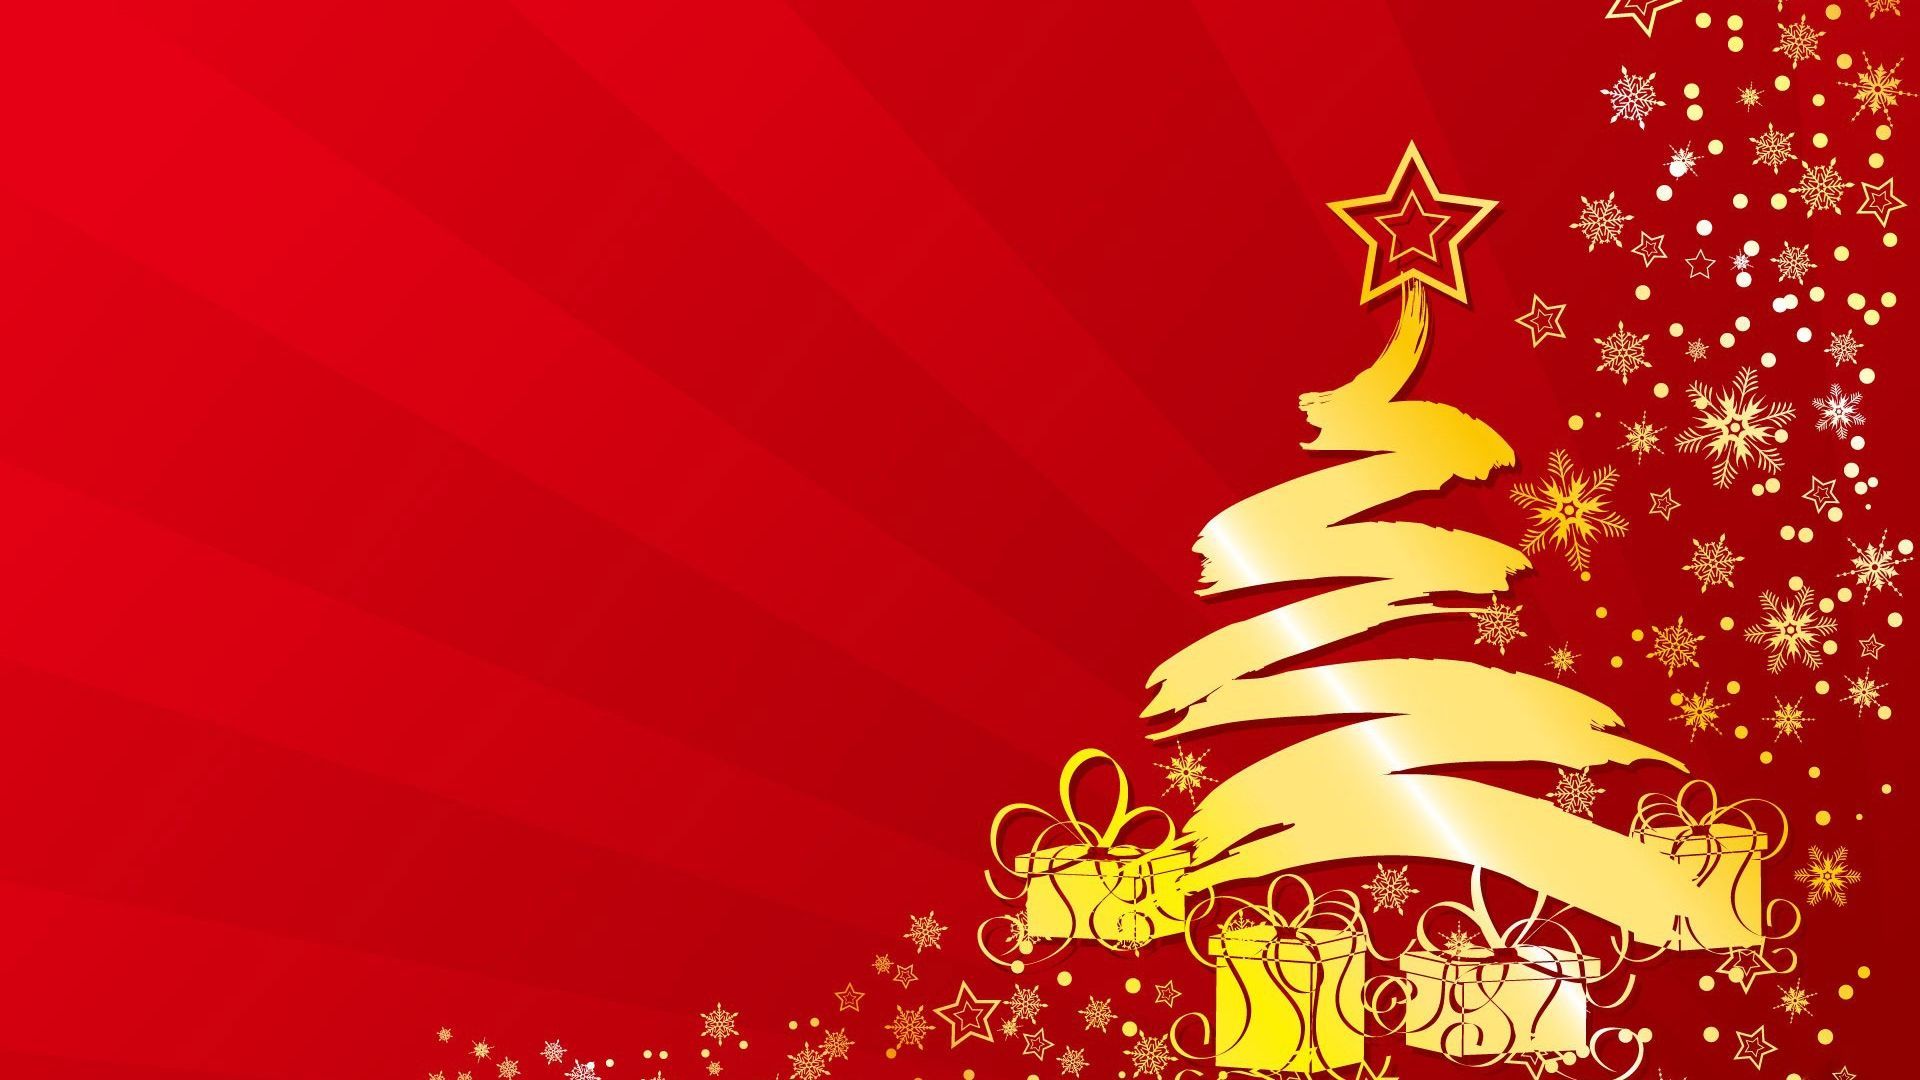 Merry Christmas wallpapers red 2015 free download Wallpapers